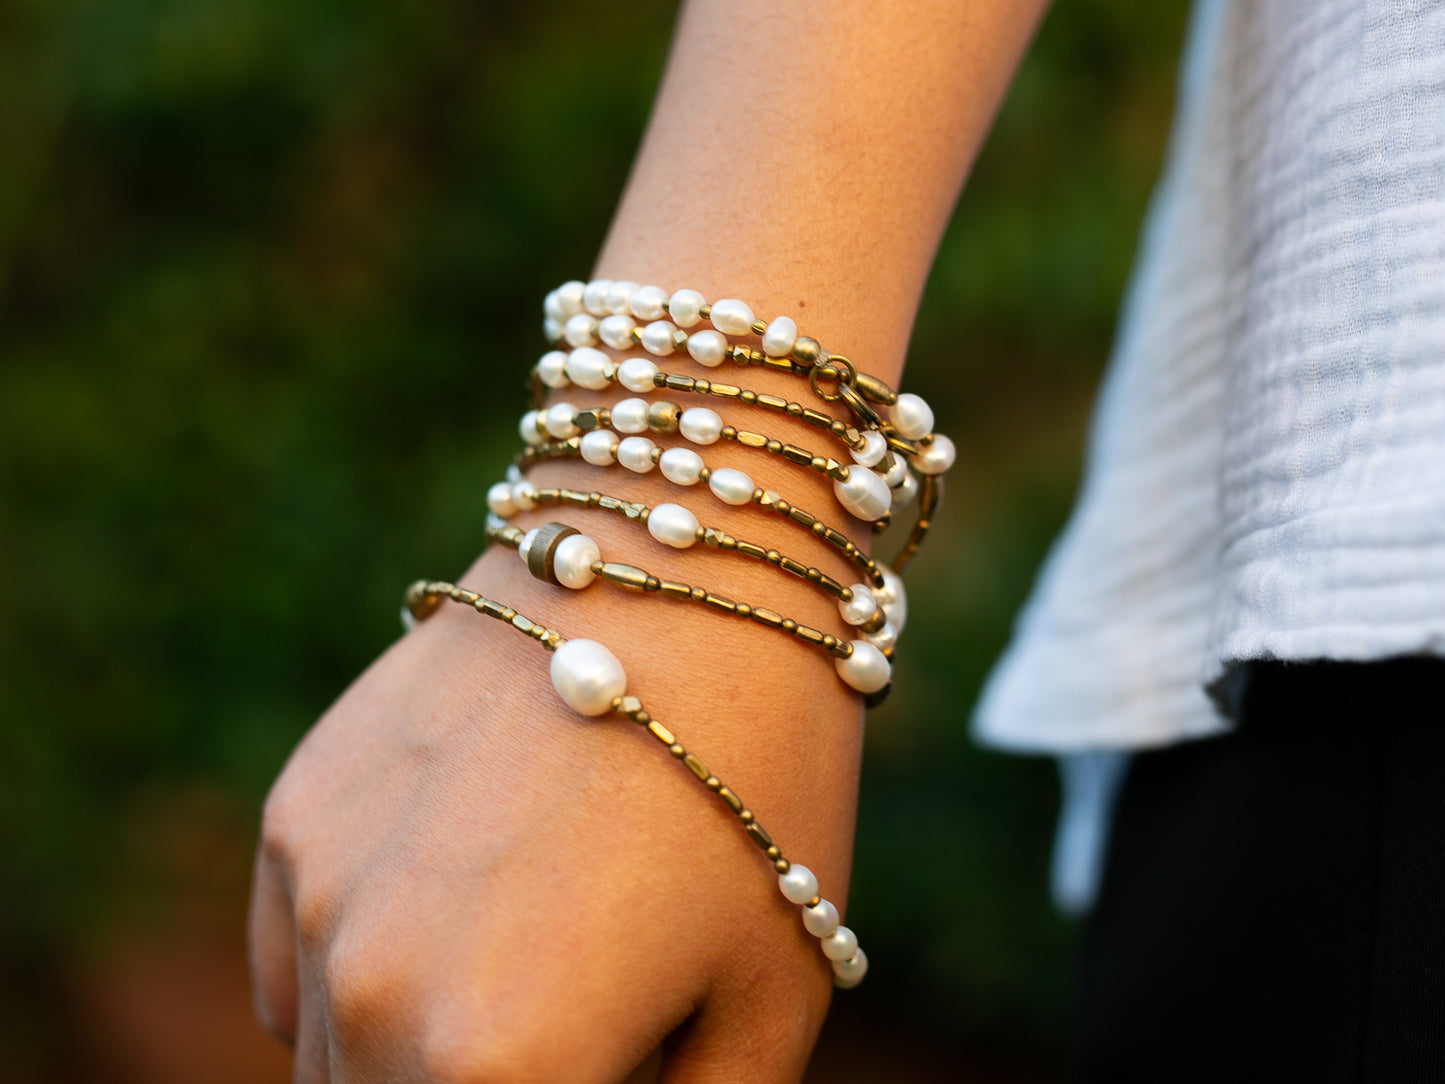 Brass and pearl necklace wrapped around hand many times